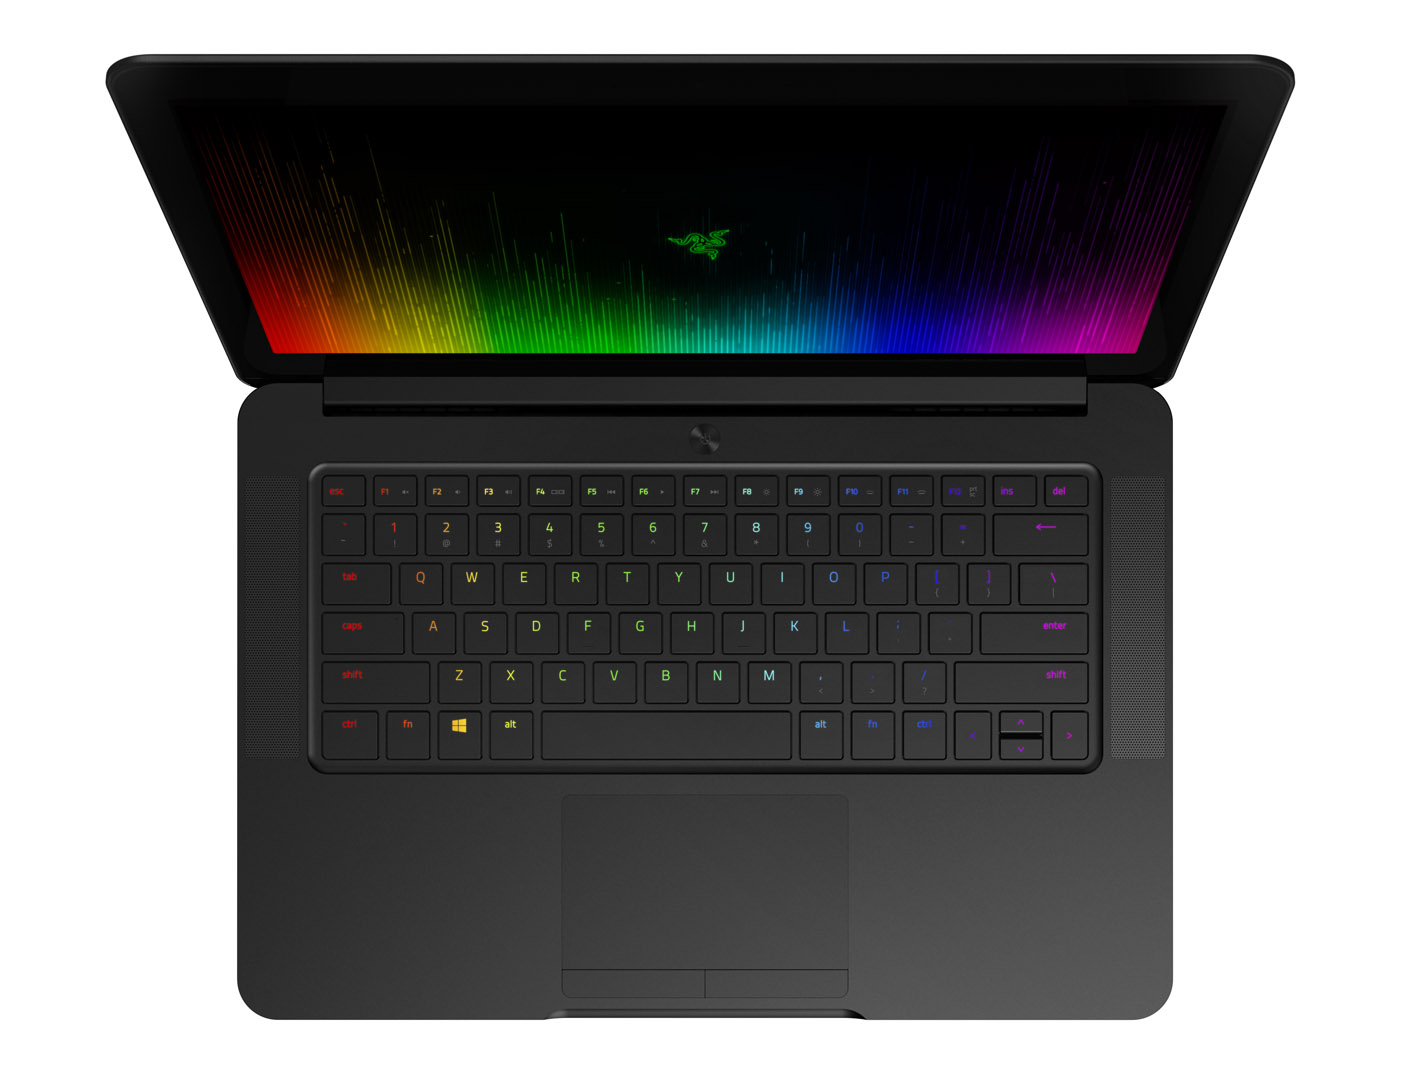 Razer Blade 2016 Review: It Gets Better Every Time